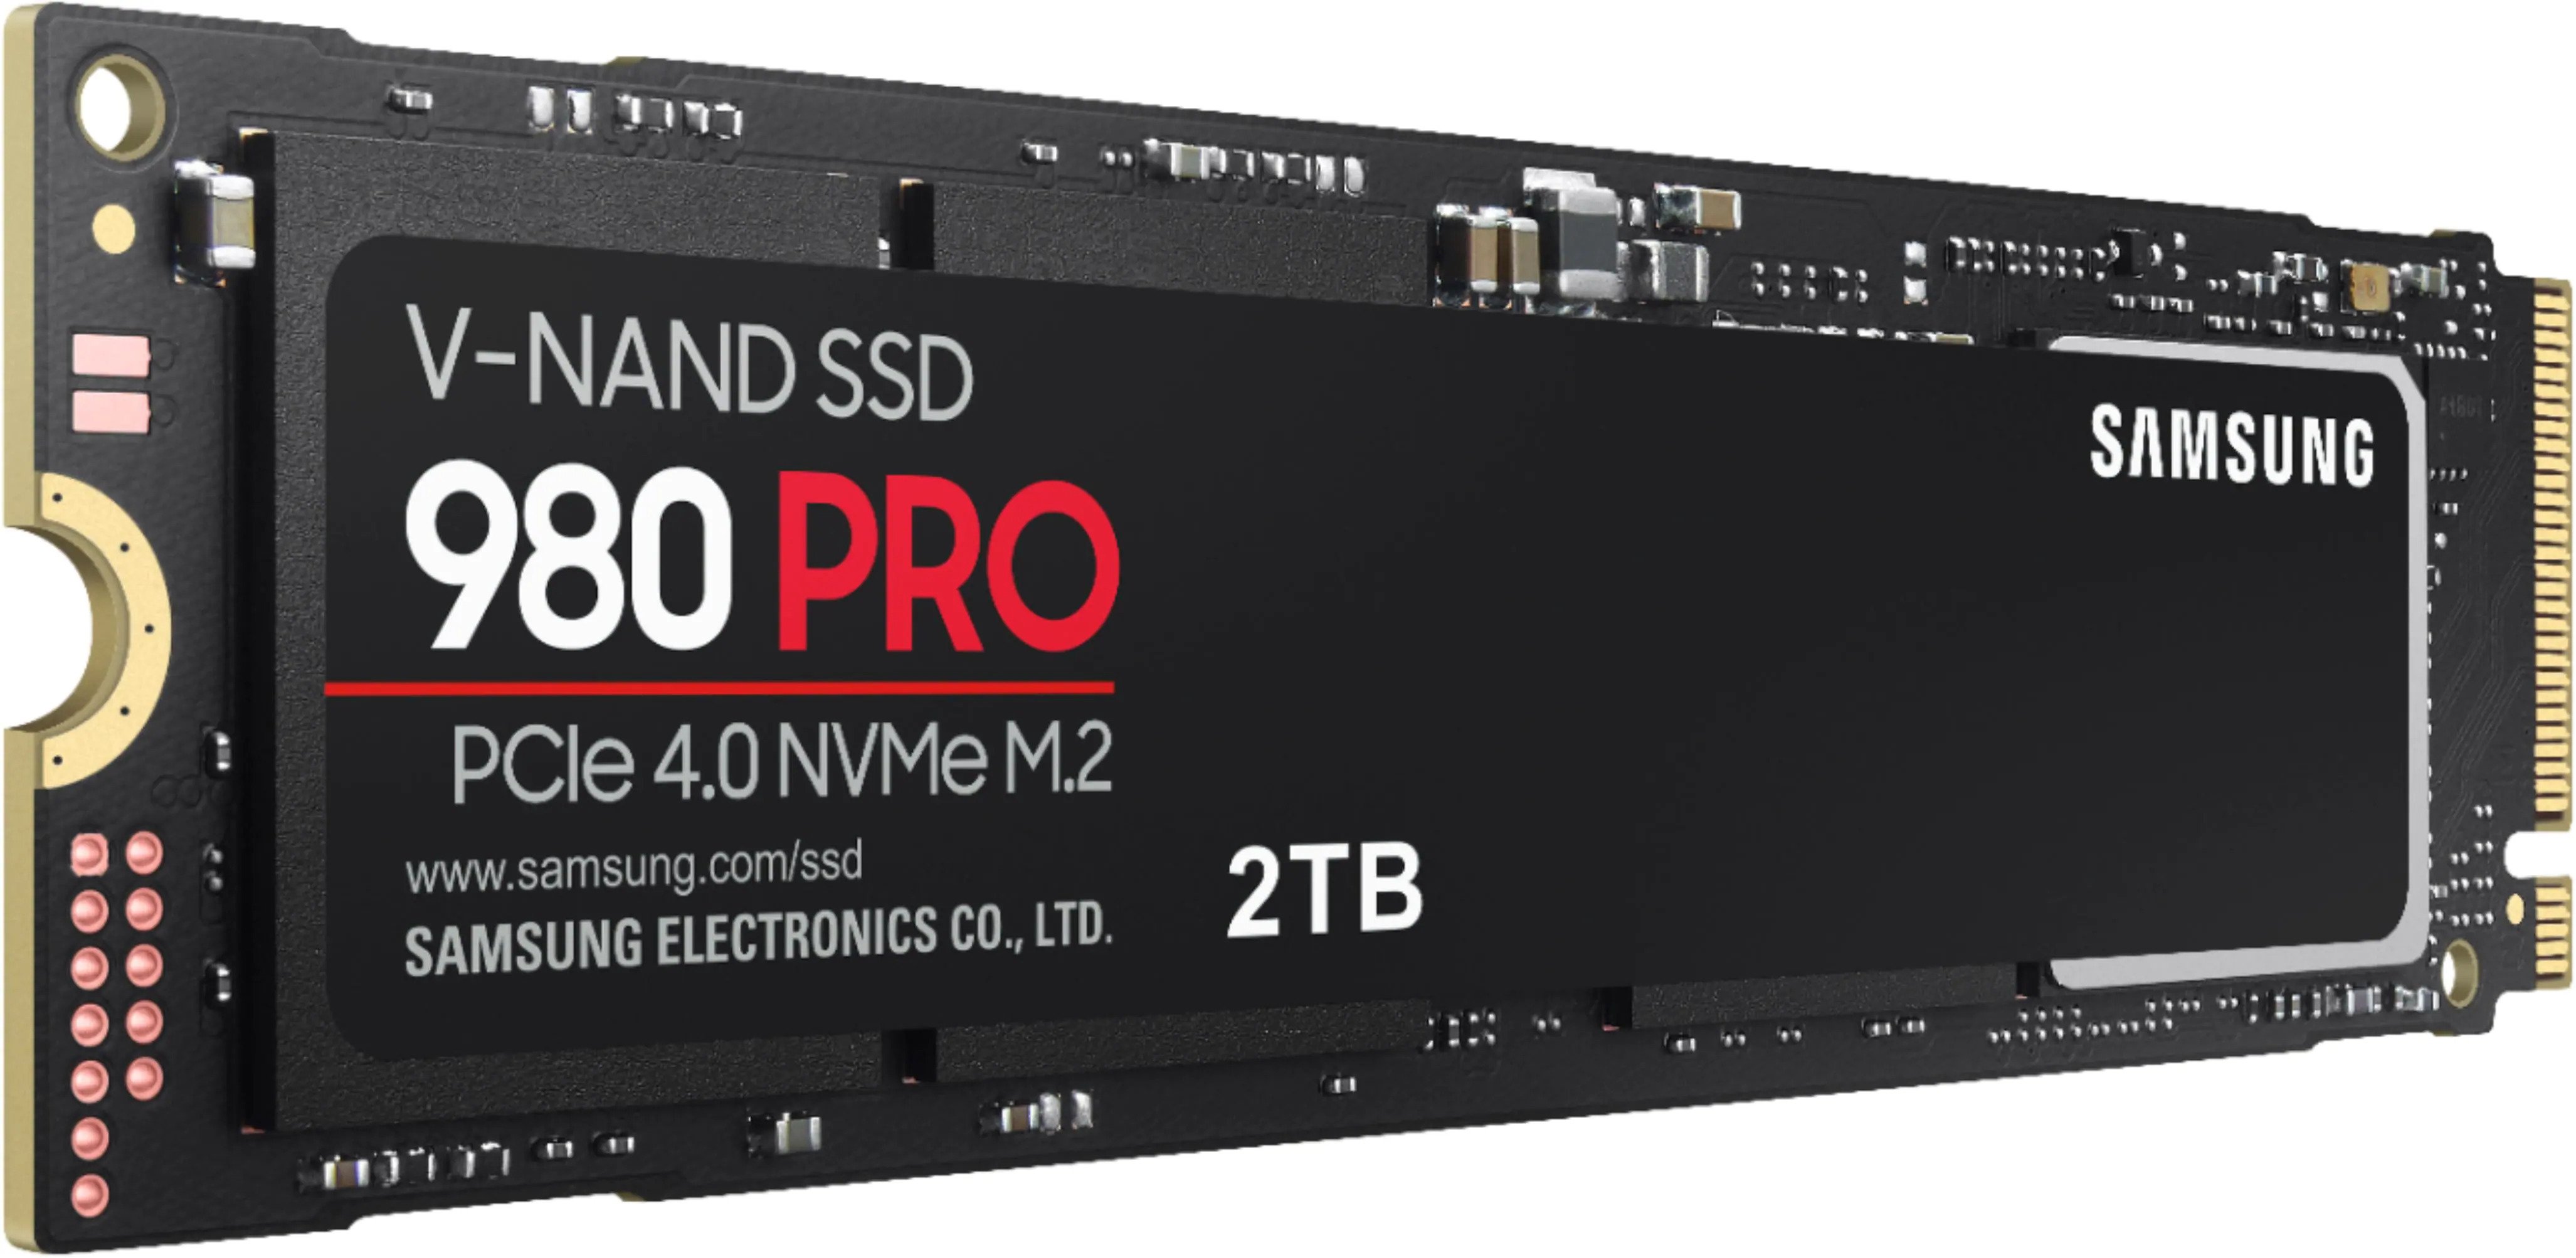 This SSD from Samsung has a discount at Best Buy Digital Trends